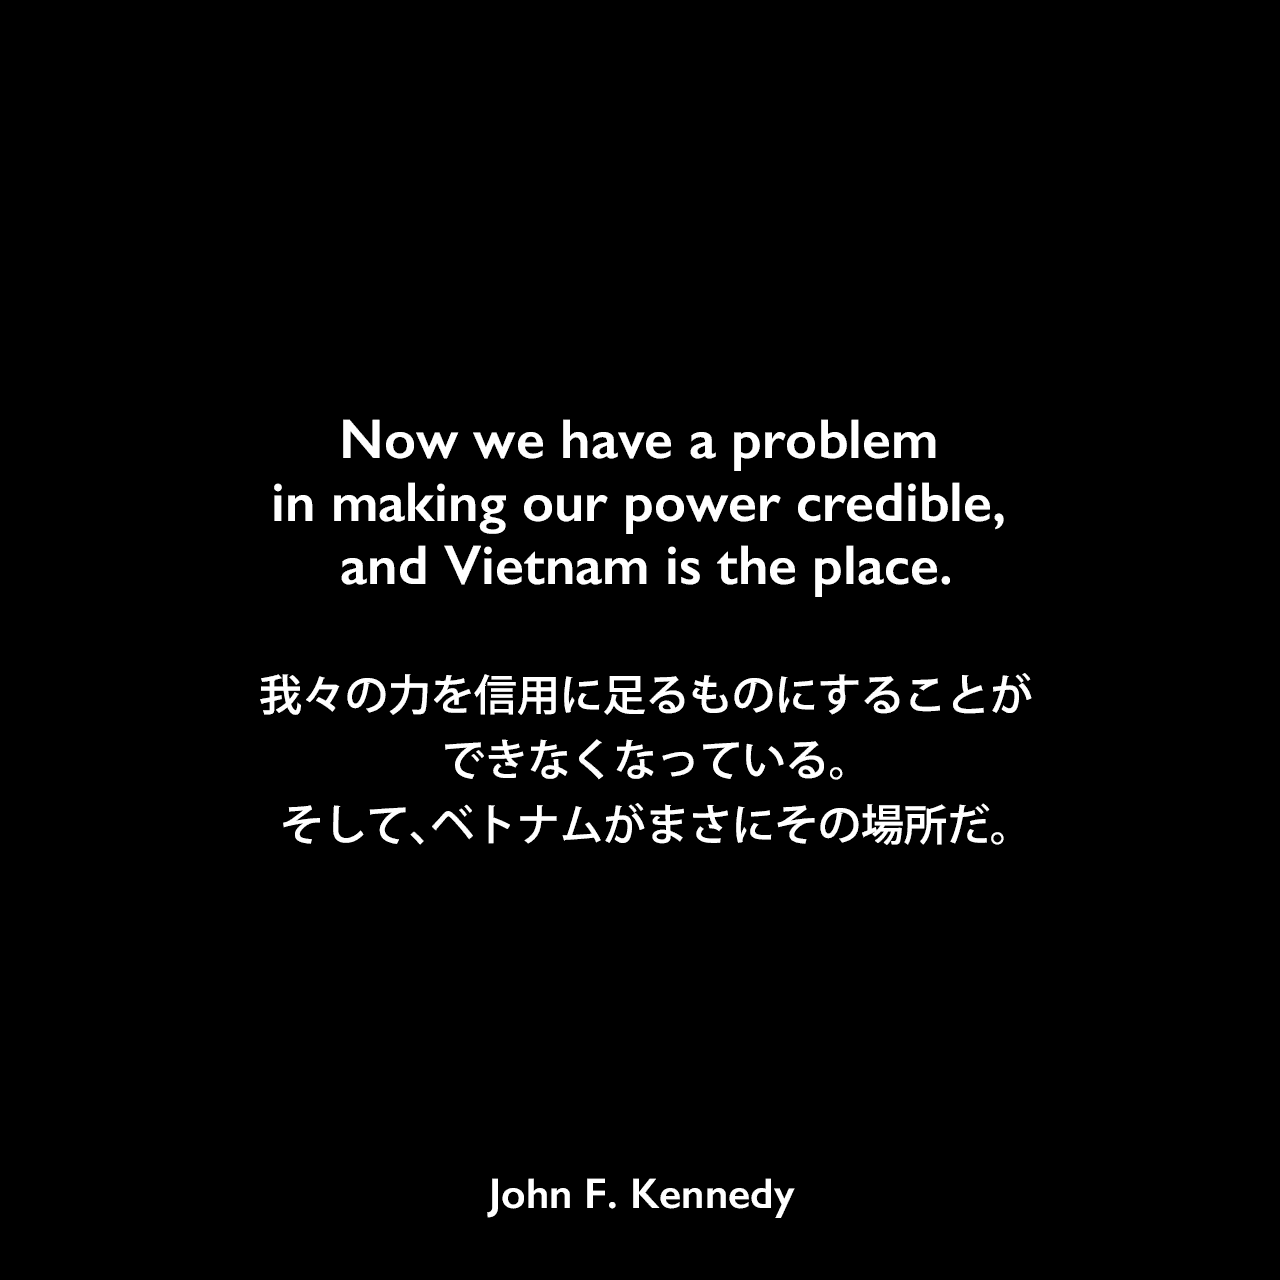 Now we have a problem in making our power credible, and Vietnam is the place.我々の力を信用に足るものにすることができなくなっている。そして、ベトナムがまさにその場所だ。John F Kennedy